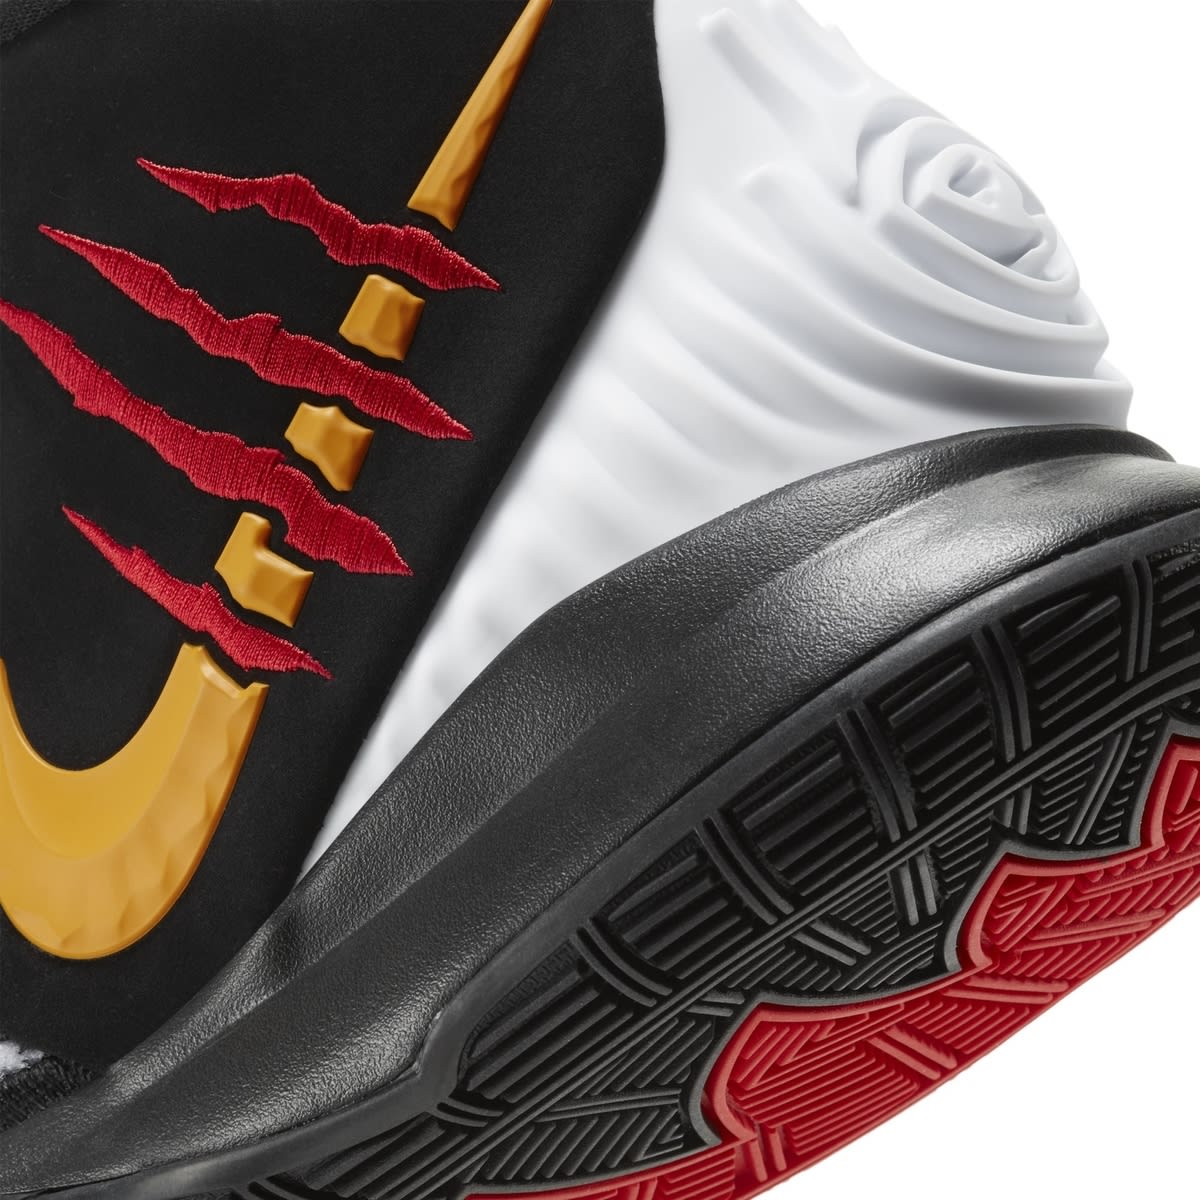 kobe and kyrie collab